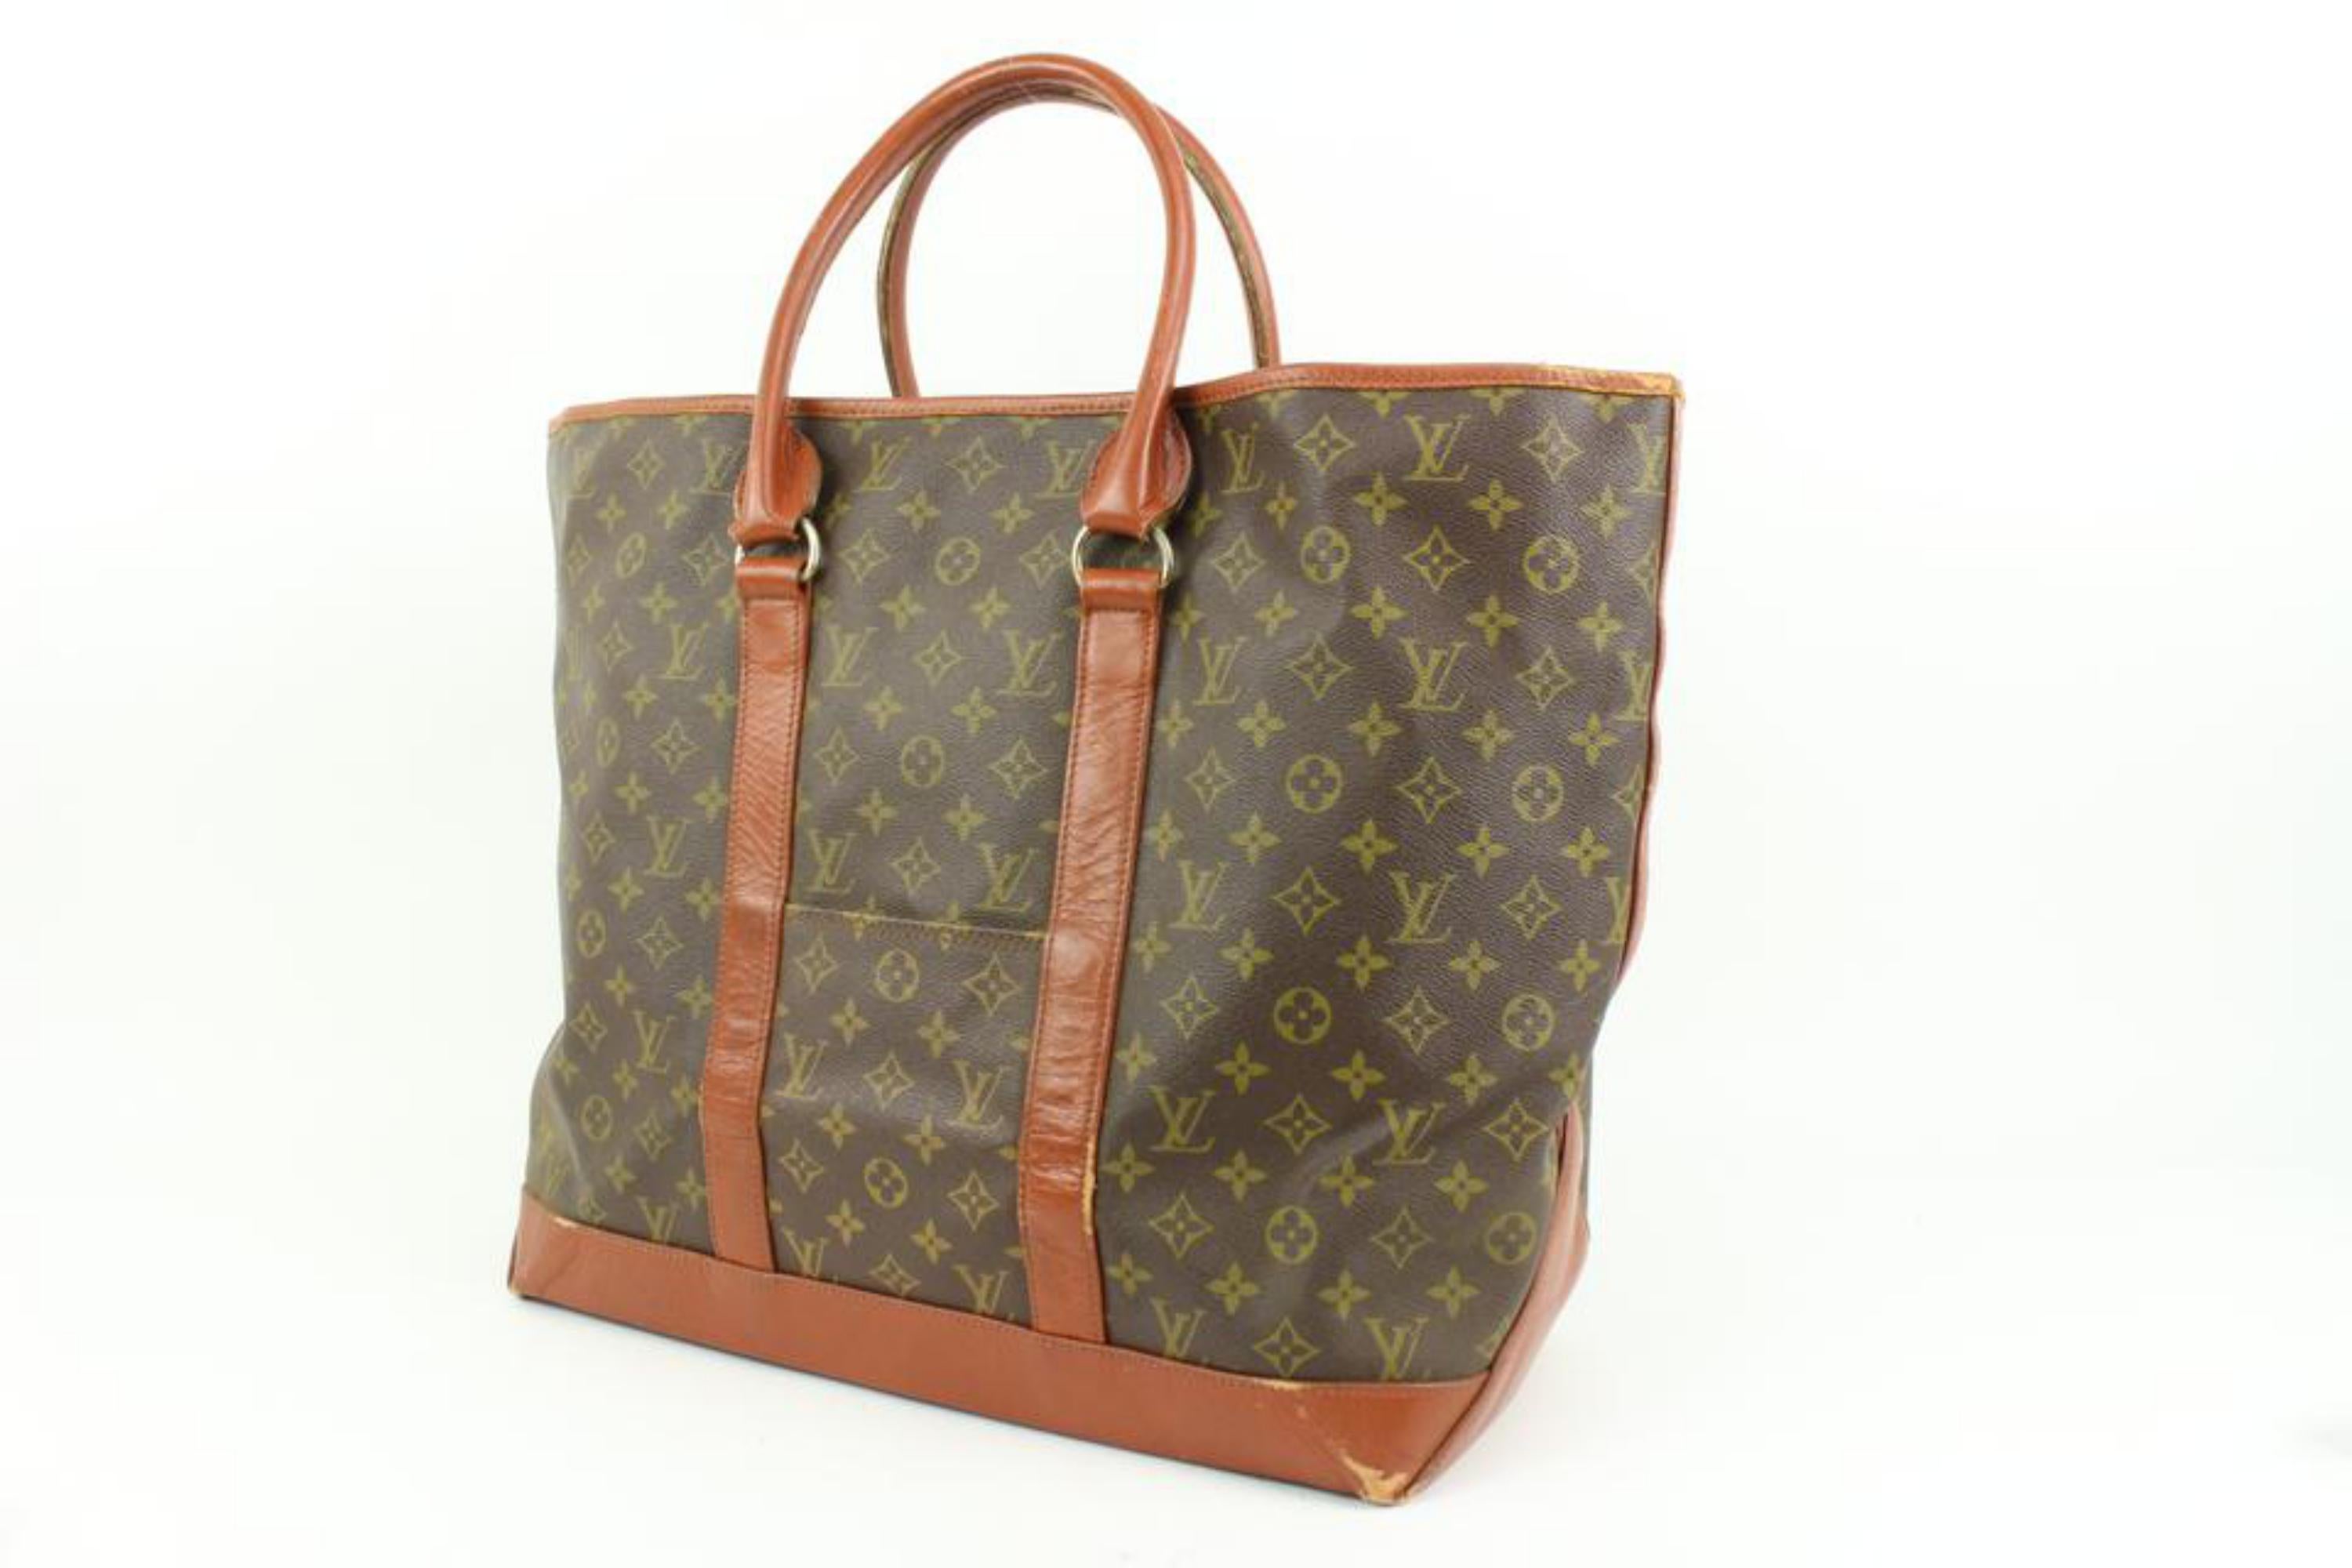 Louis Vuitton Rare XL Sac Weekend GM Tote Bag 17lz419s
Made In: France
Measurements: Length:  22